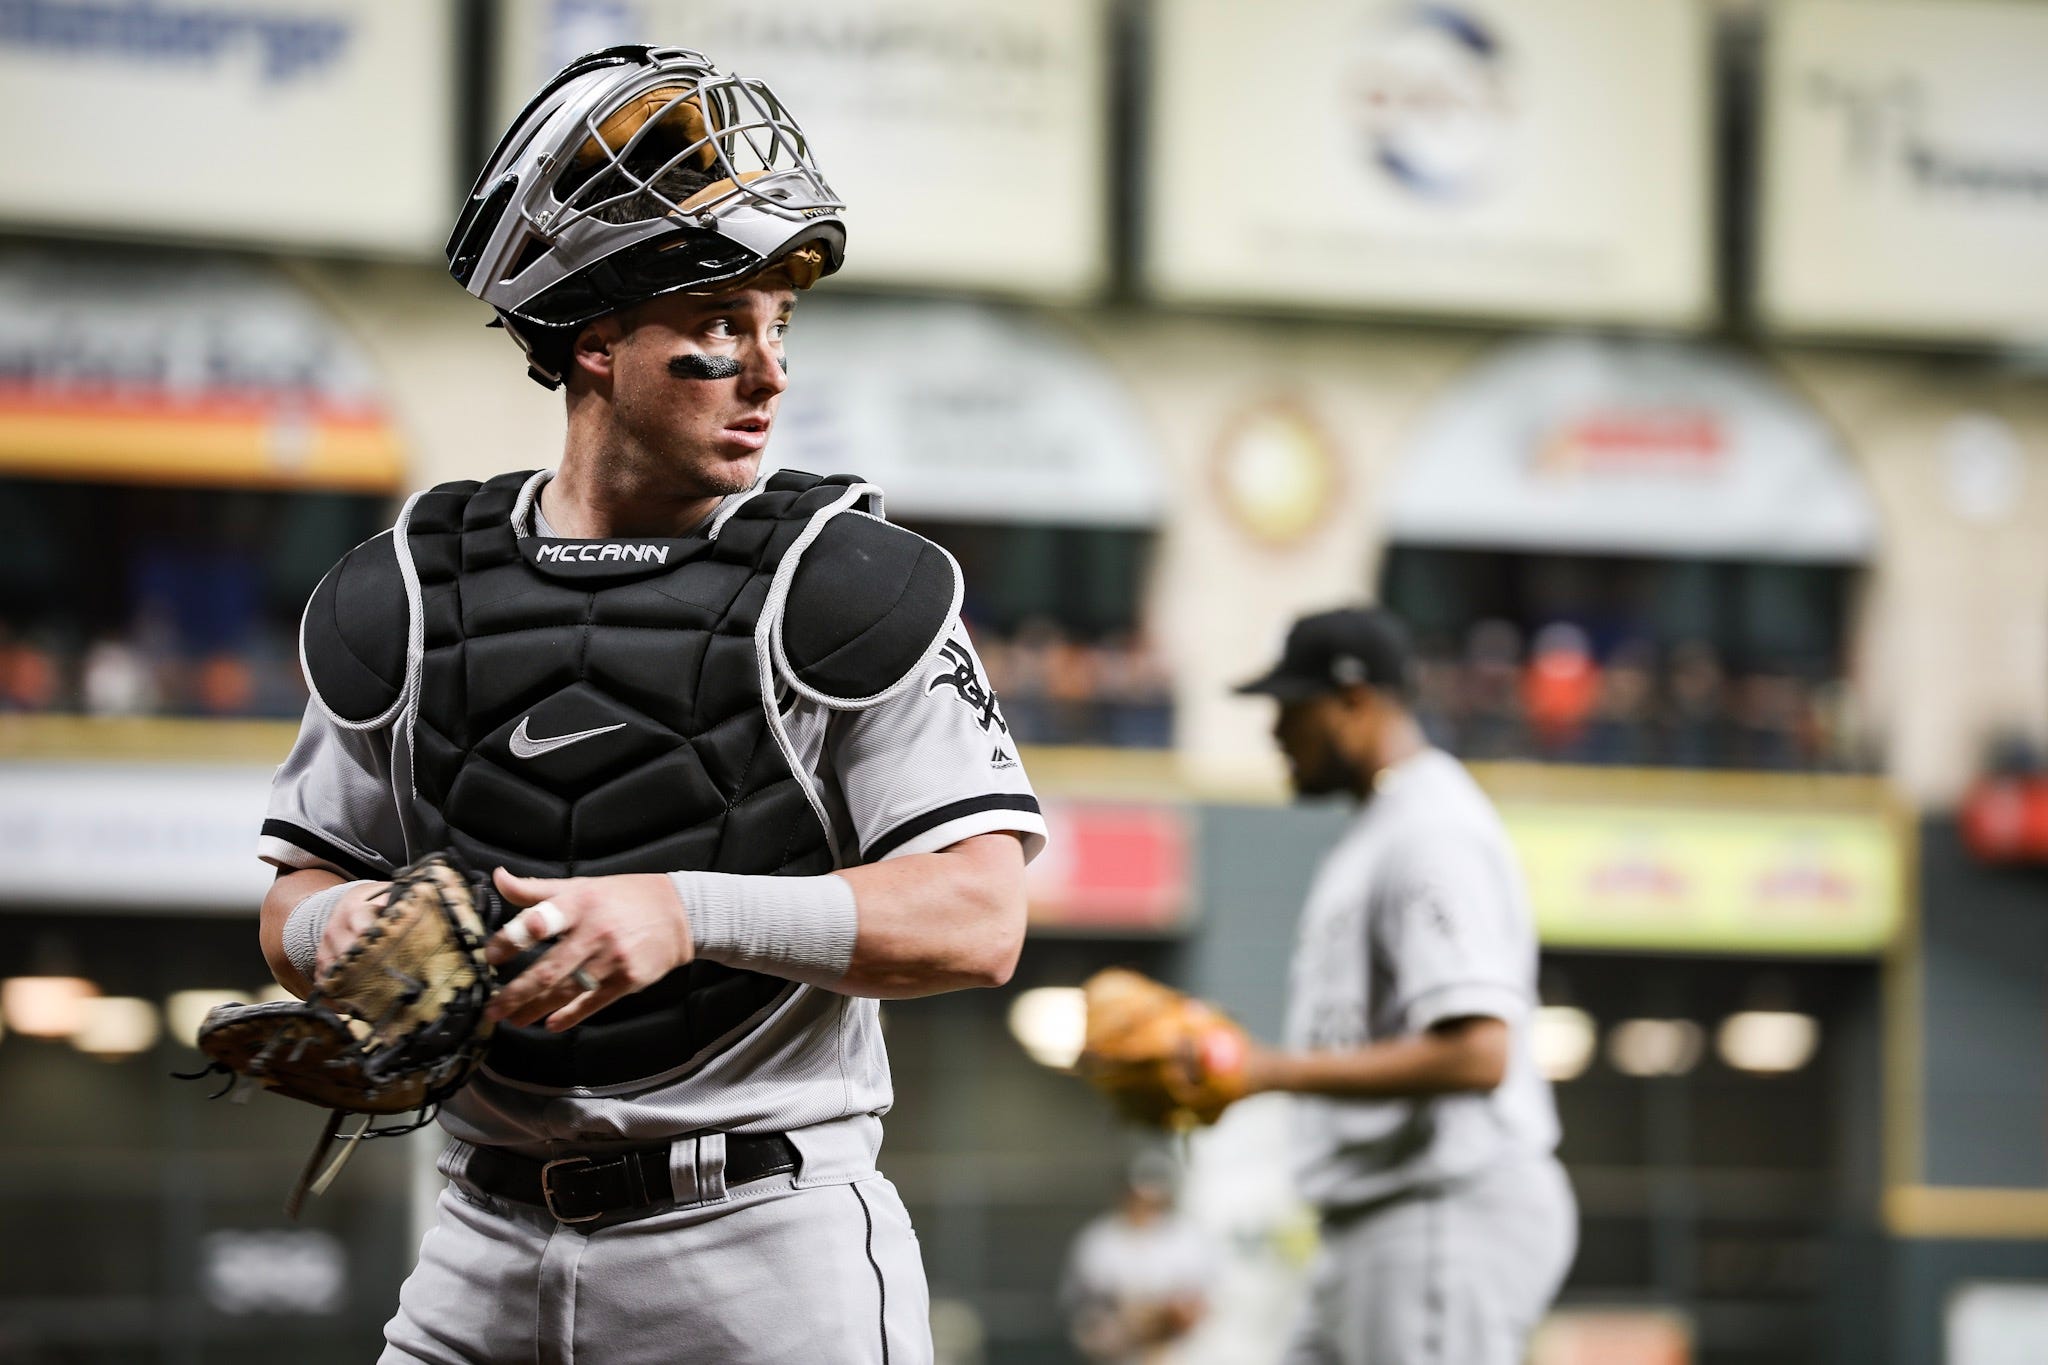 10 Reasons to Vote for James McCann for 